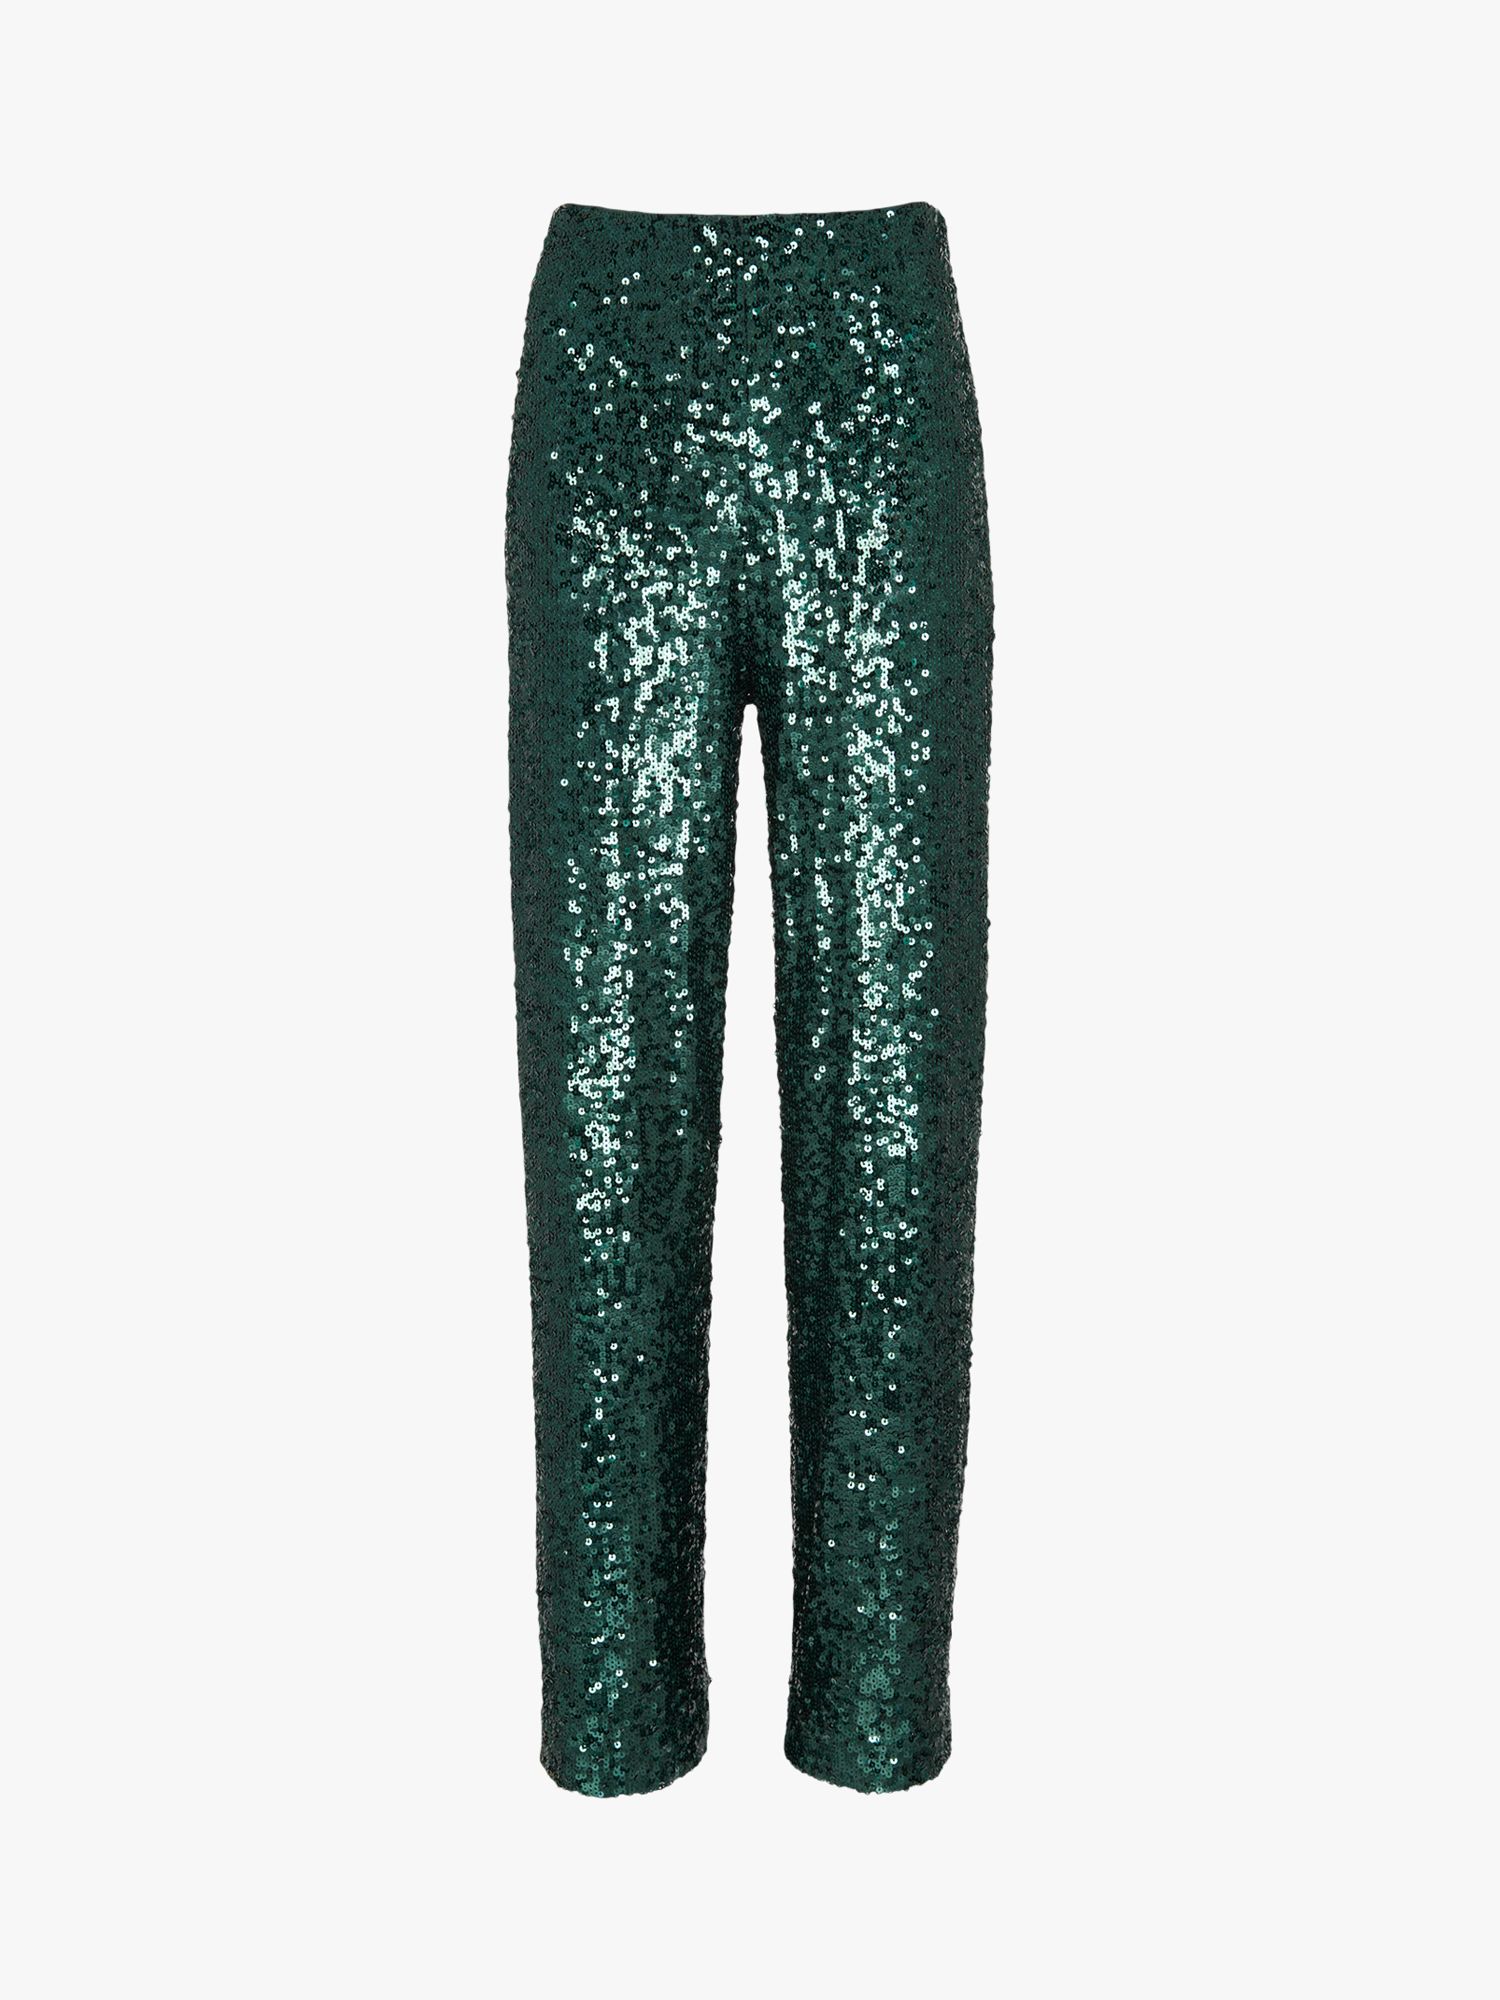 Whistles Petra Sequin Trousers, Dark Green at John Lewis & Partners